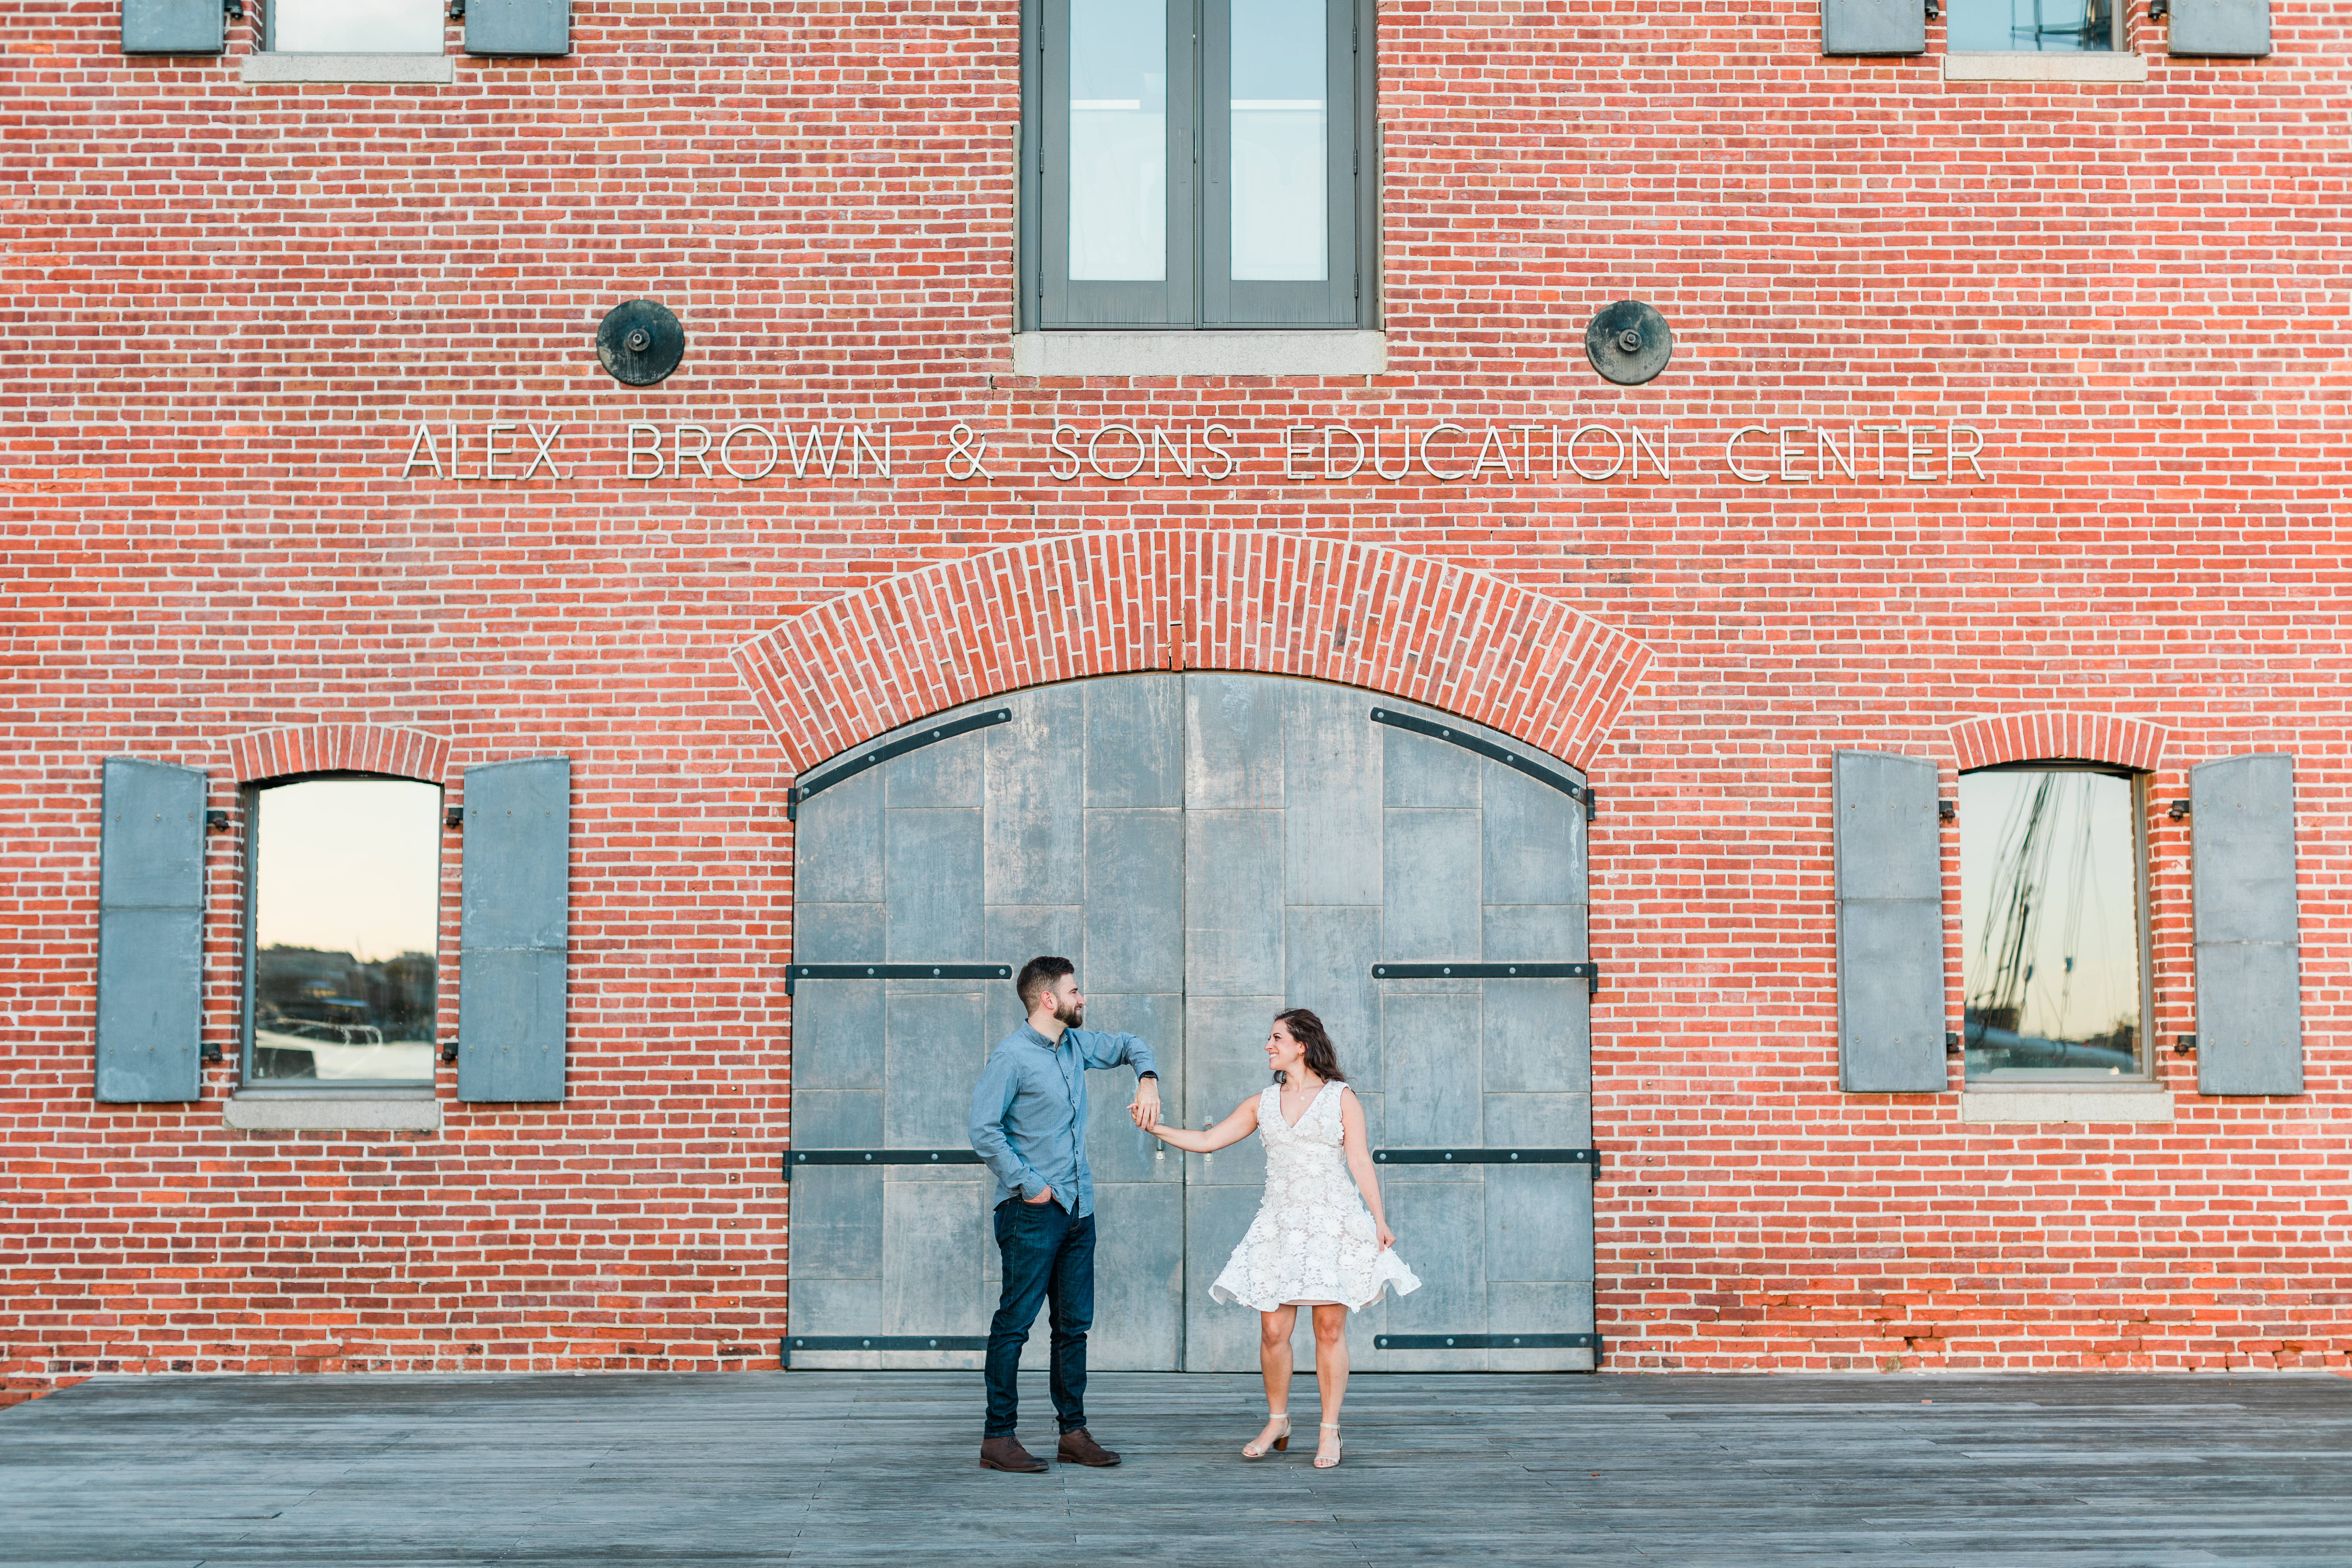 A woman in a white dress and man in a blue shirt dance in front of a red brick building with blue doors in Fells Point Baltimore